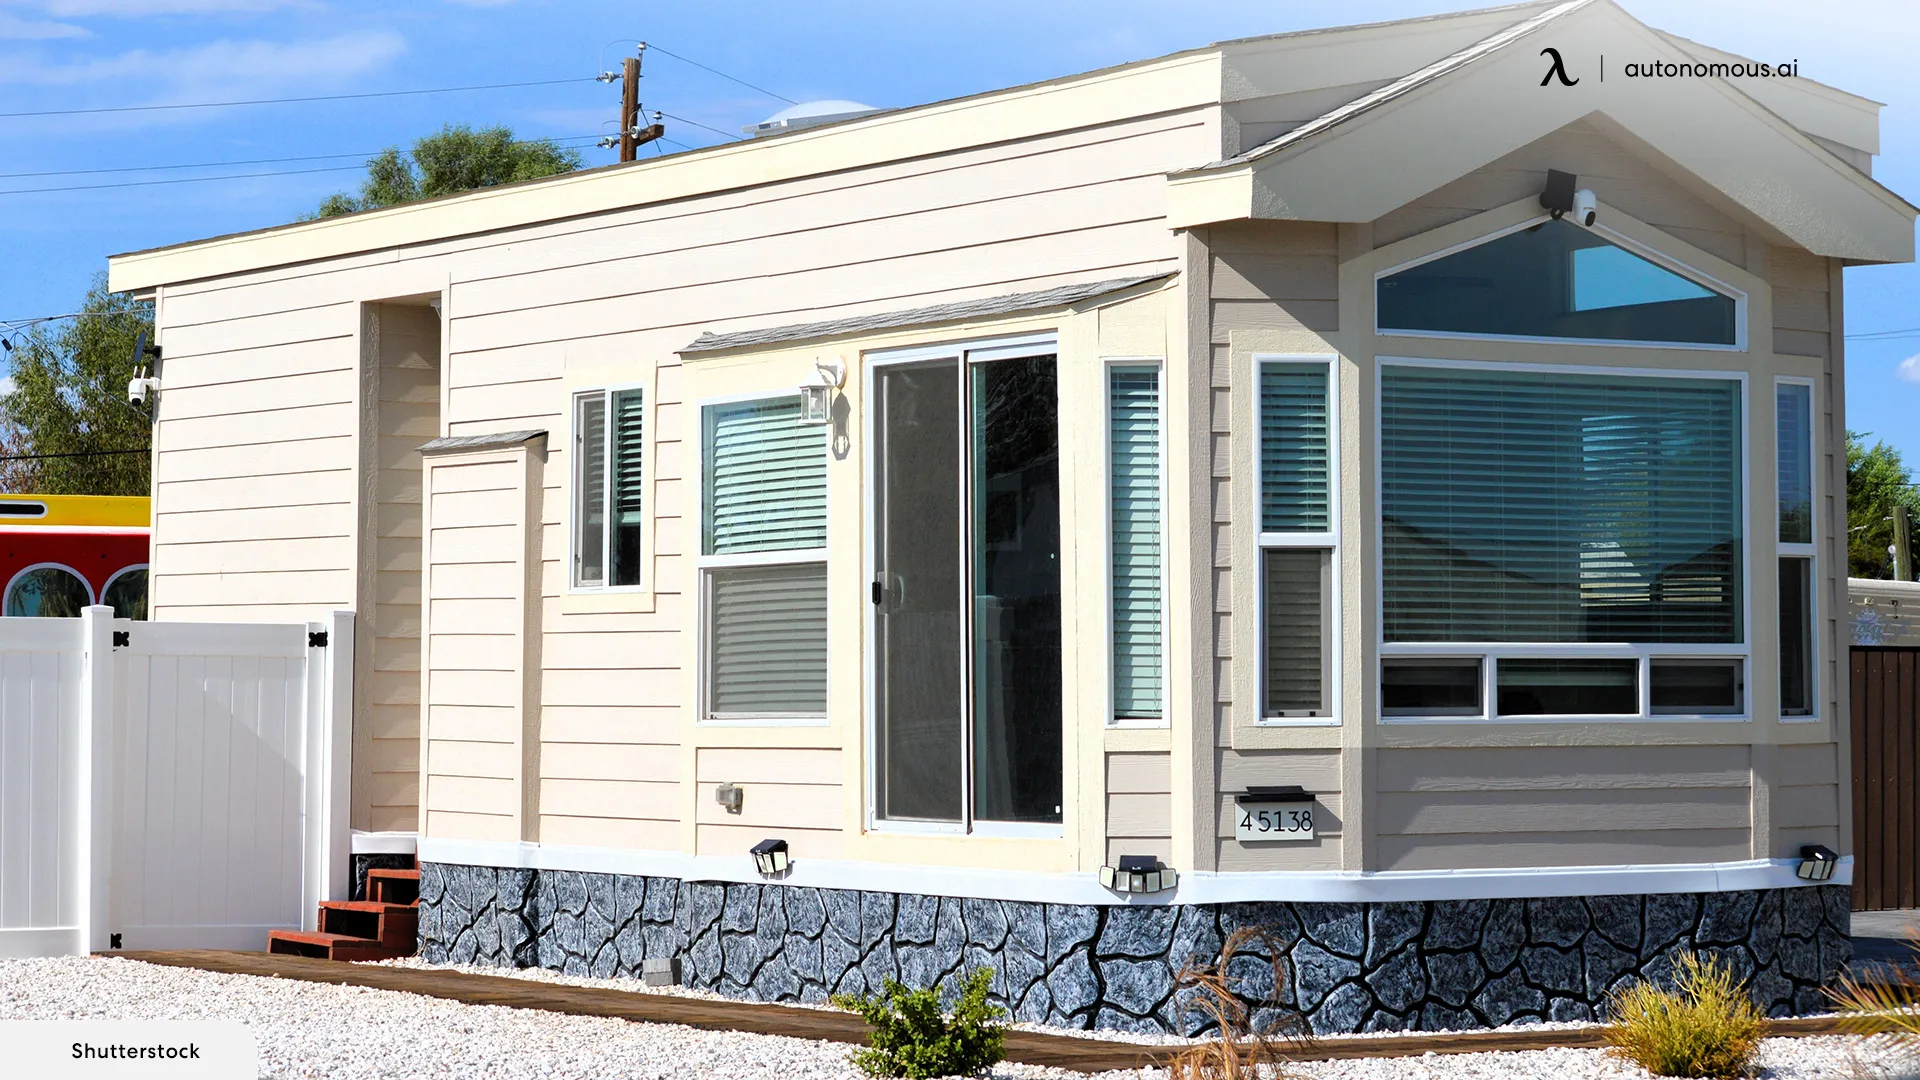 Key Considerations for Buying Prefab Homes in California